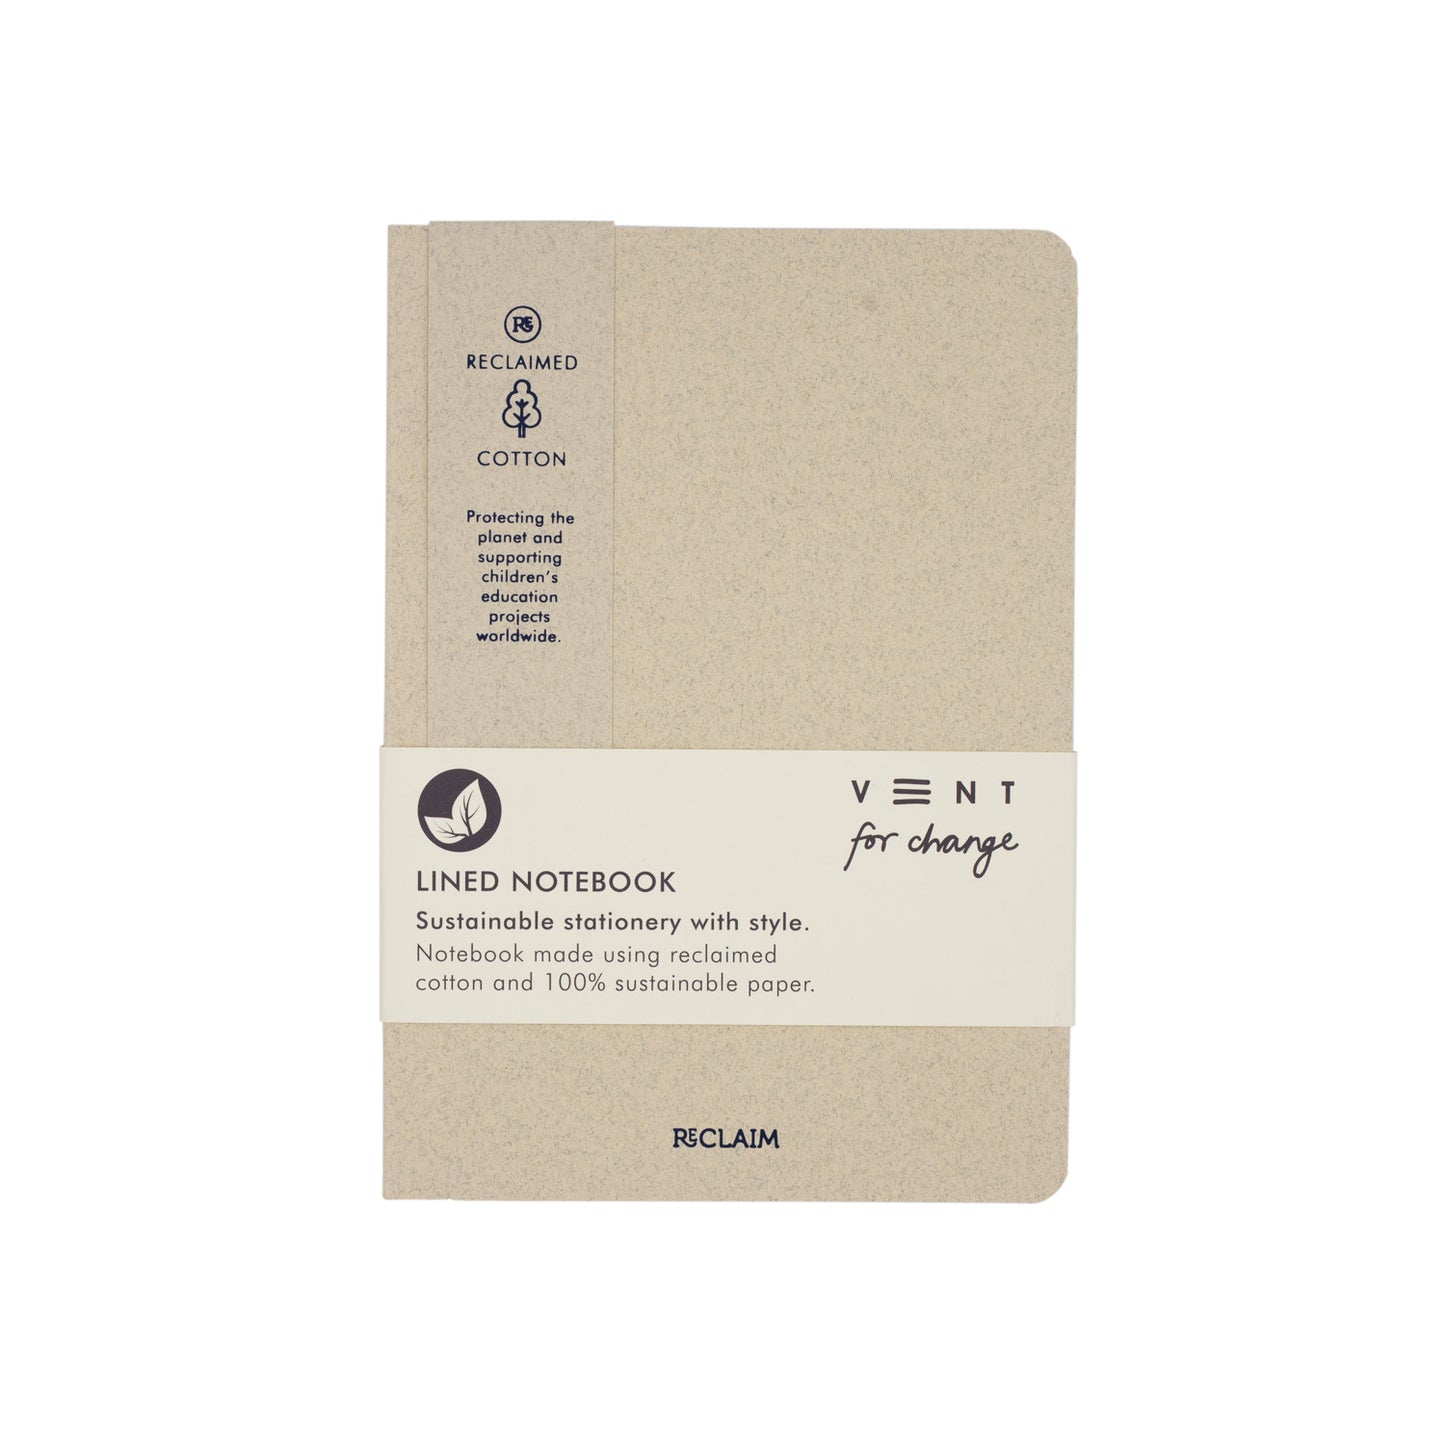 A cream notebook with "VENT FOR CHANGE" logo and information about the notebook being made from reclaimed cotton.